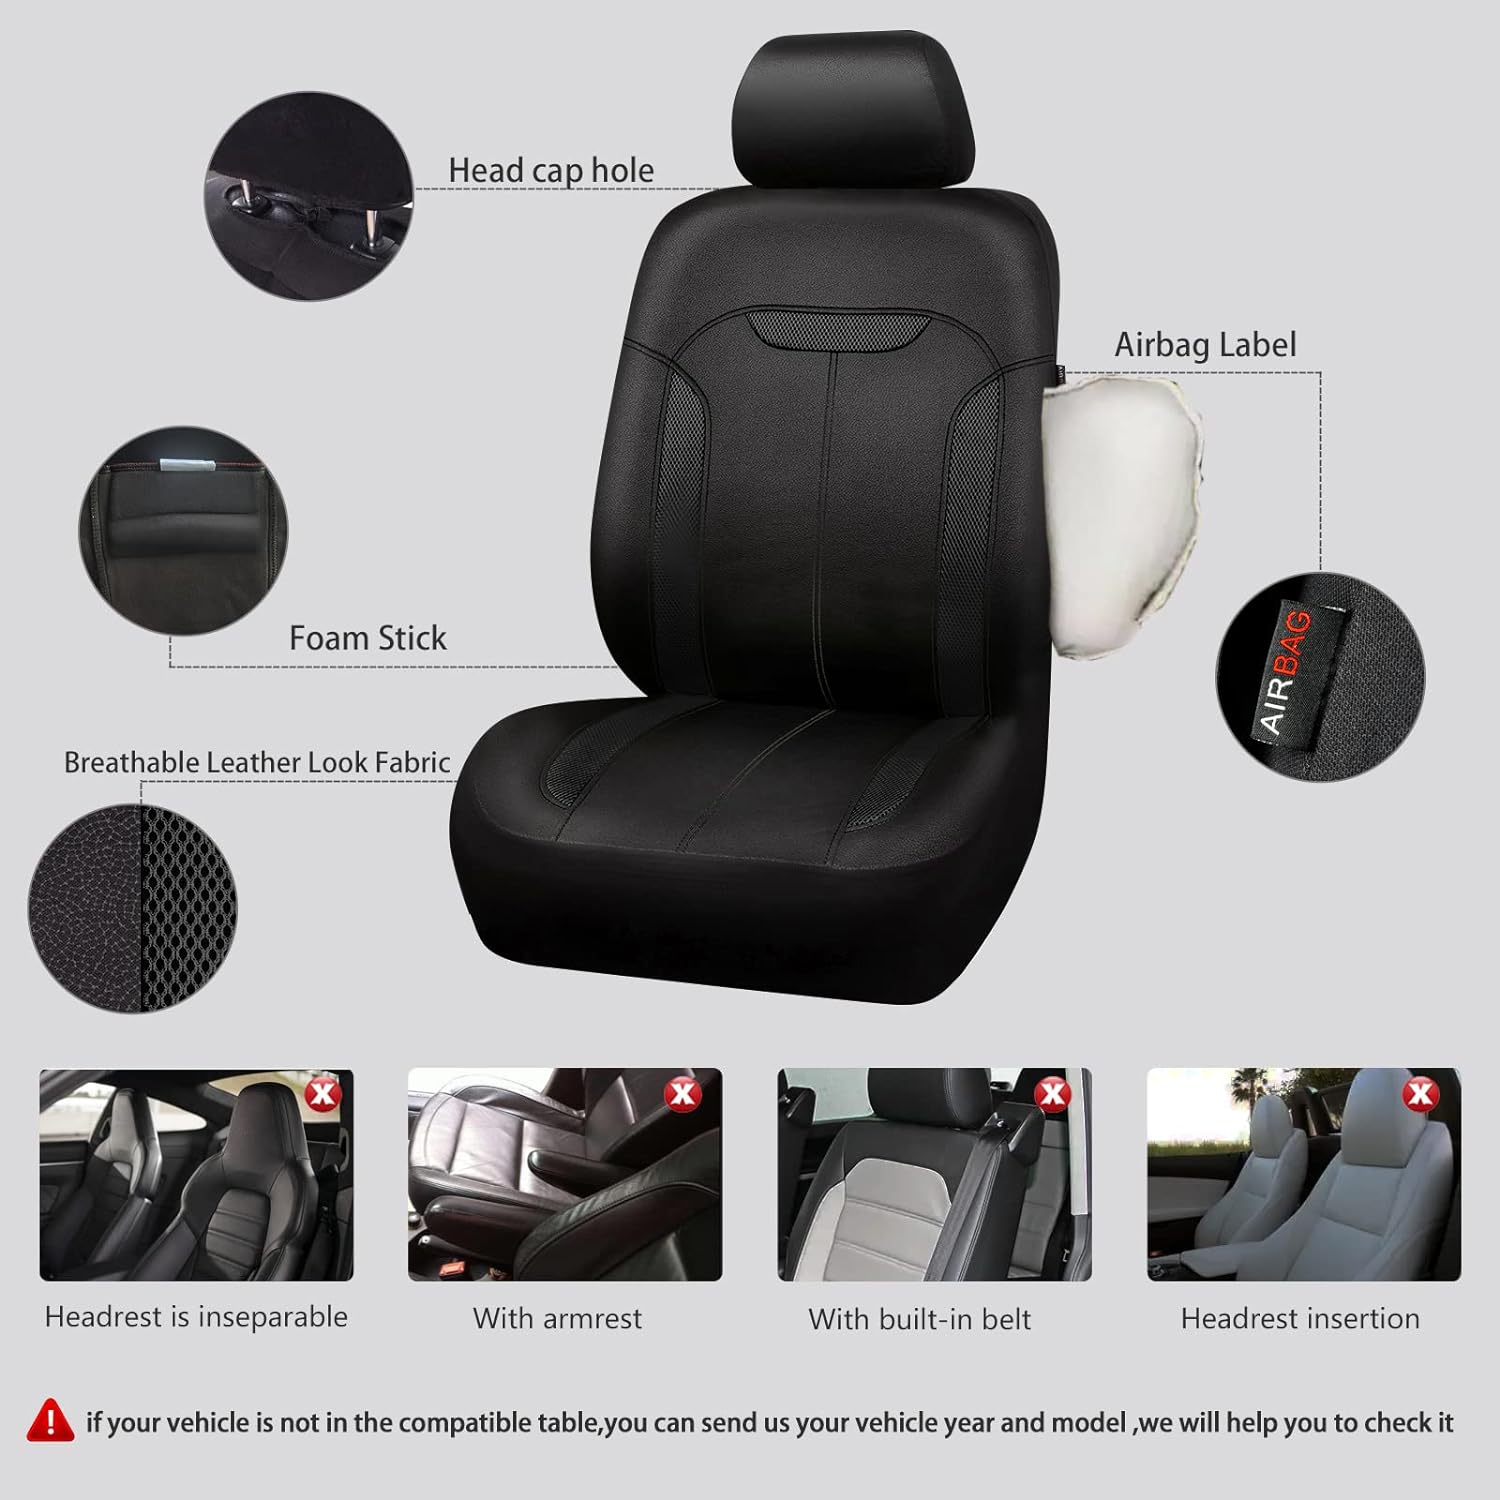 CAR PASS 3D Air Mesh in Cloth Leather Grain Breathable Car Seat Covers Full Set, Universal Compatible Fit 95% Car,SUV,Truck,Sedan,Van,Automotive, 3zipper Rear Bench Armrest Airbag Sports, Black Red